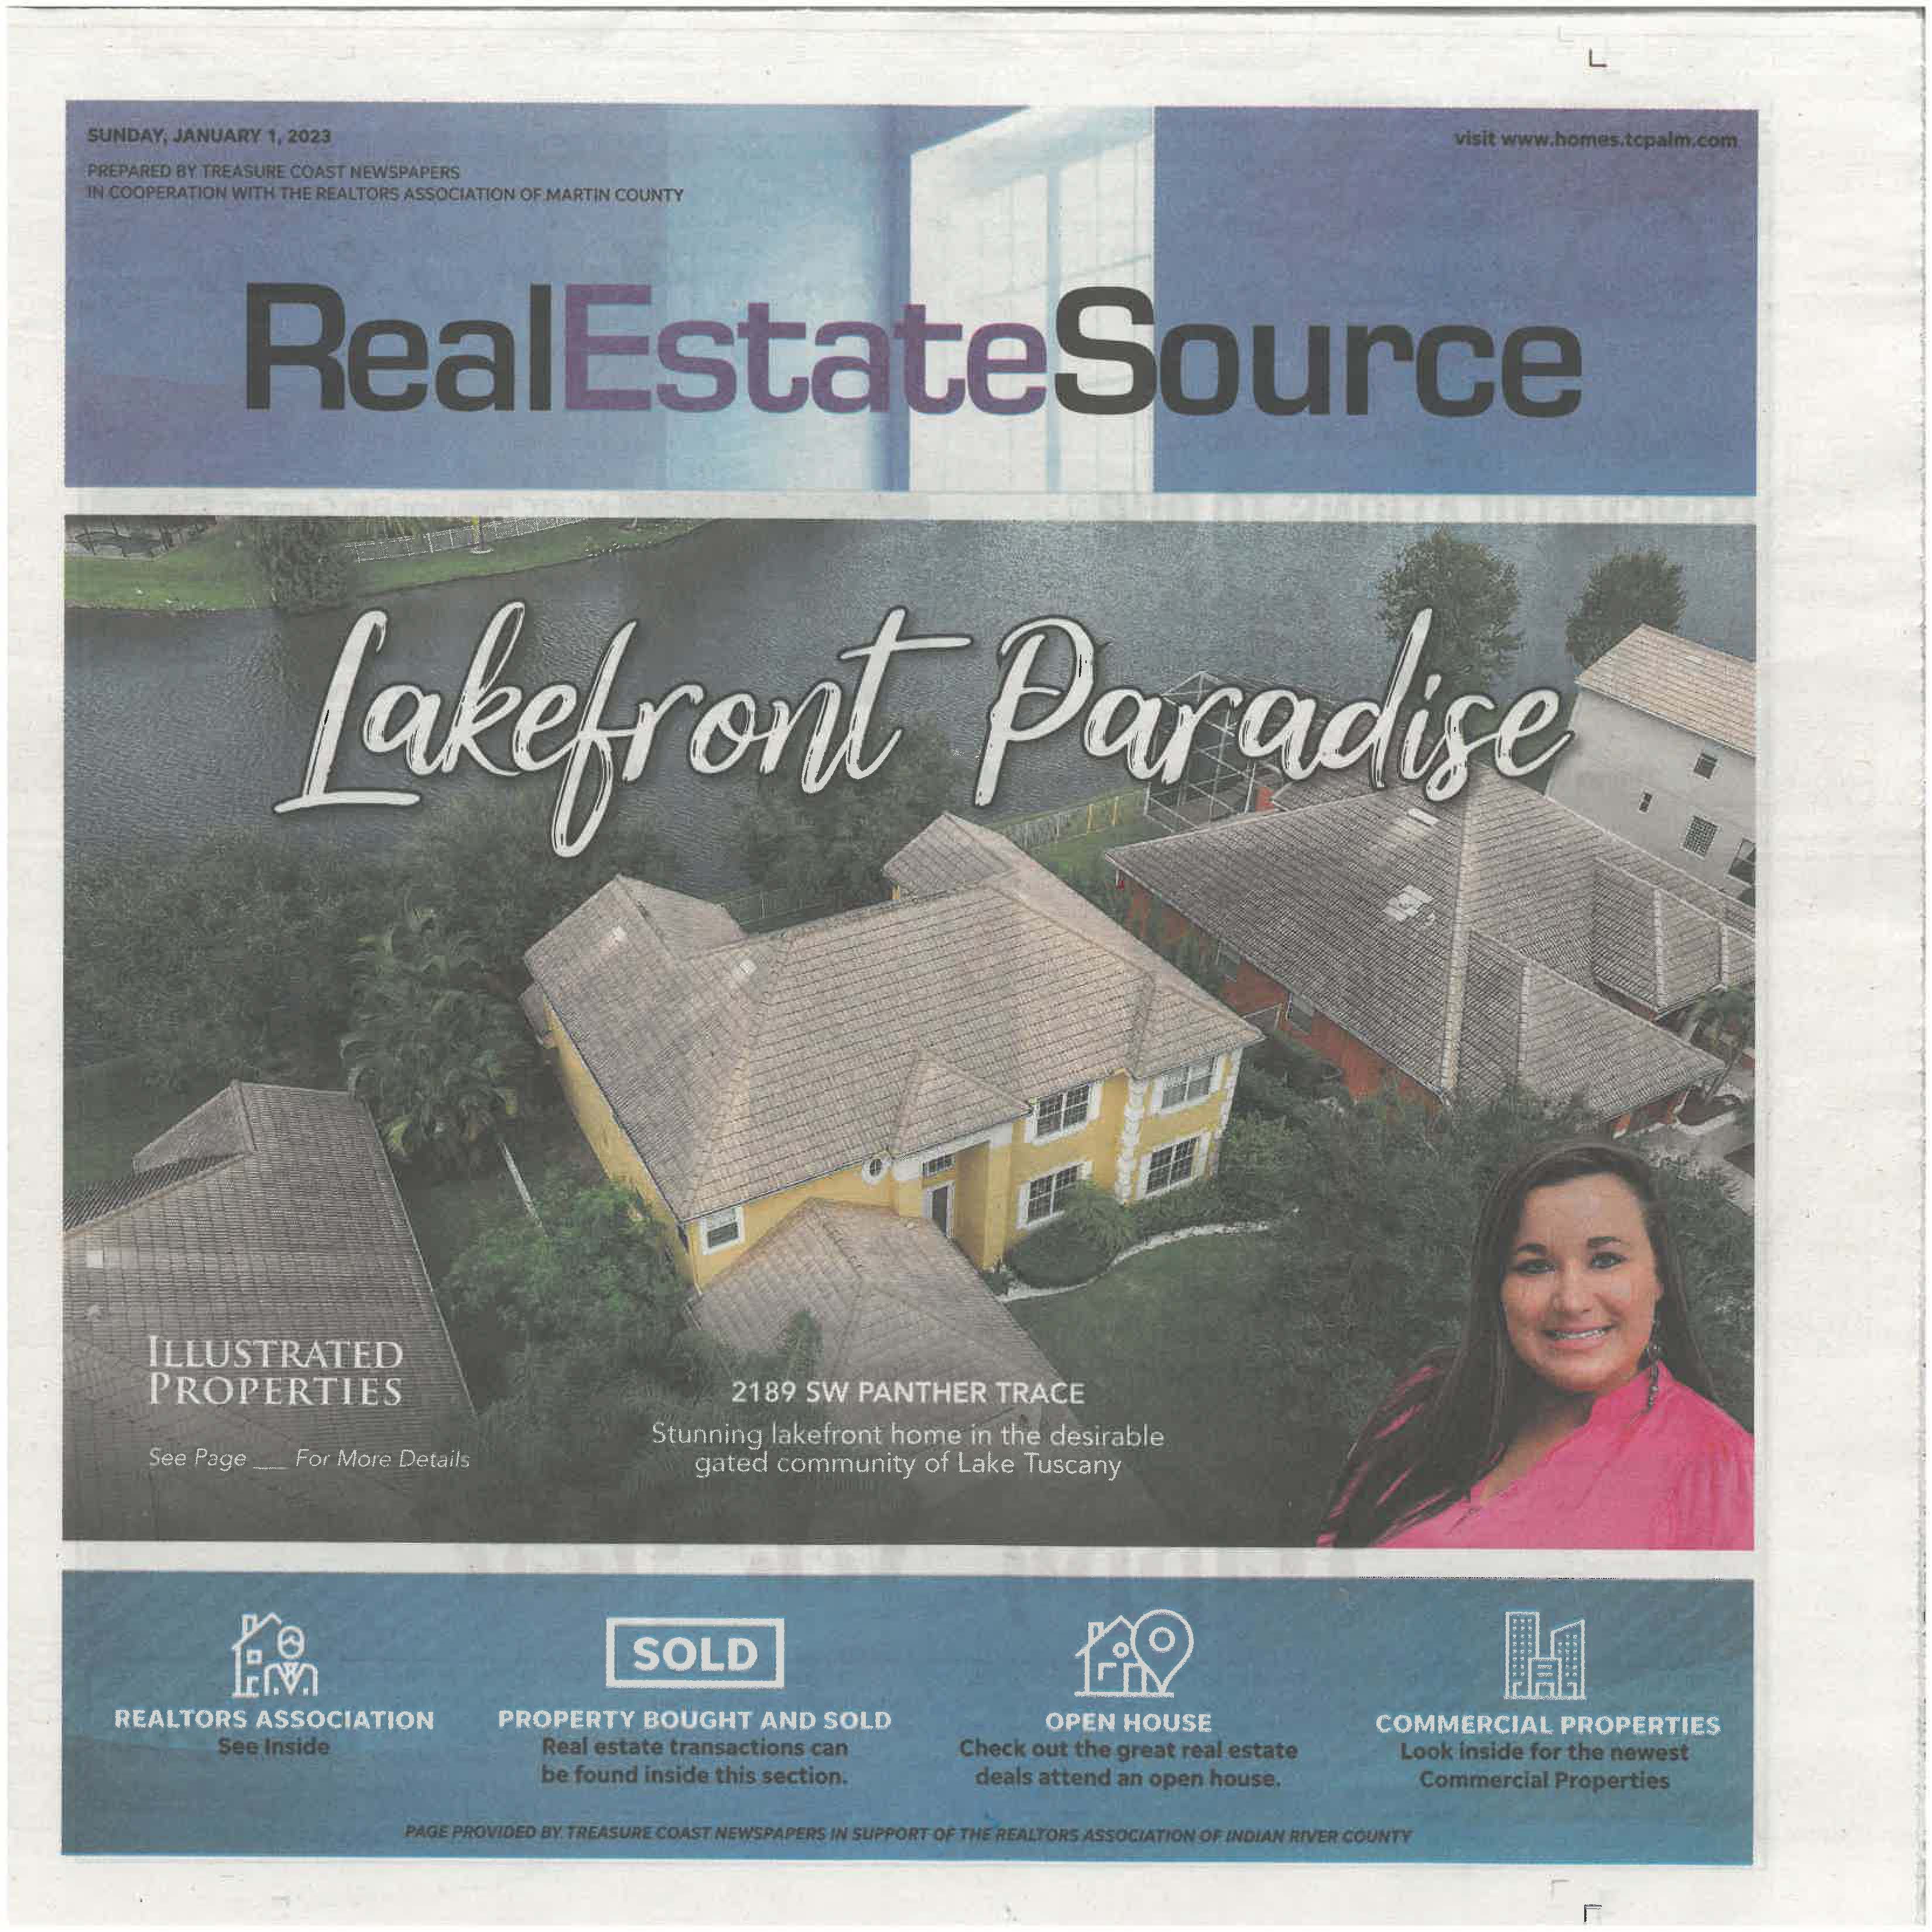 TCPalm Real Estate Source Cover Jan. 2023